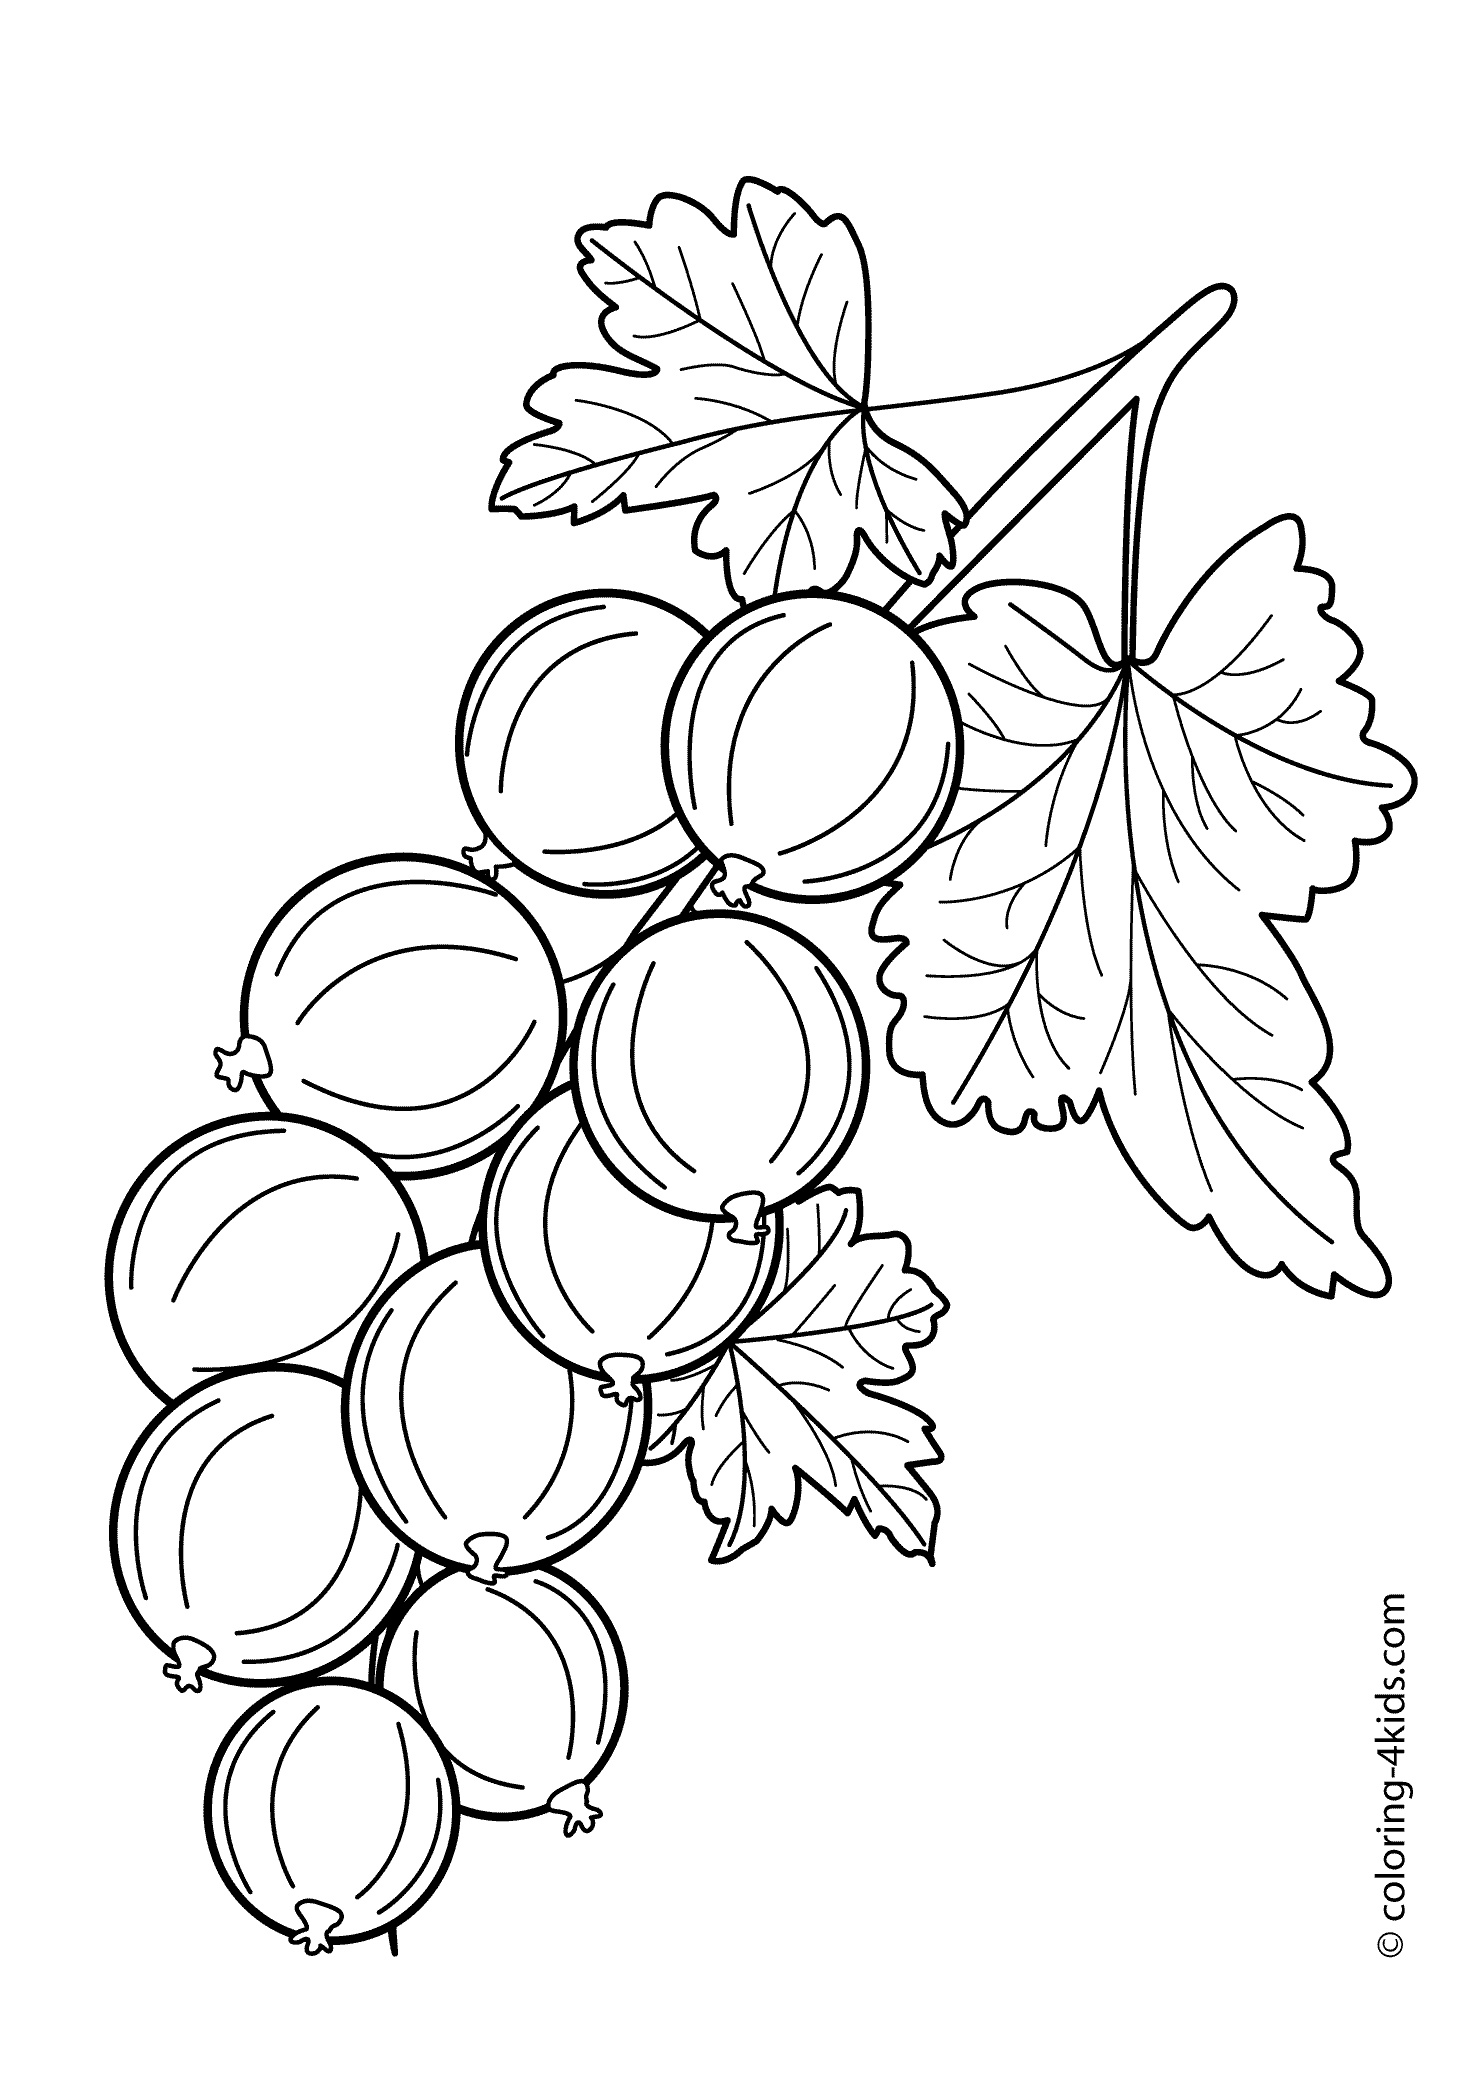 free printable vegetable coloring pages vegetable coloring pages hellokidscom pages vegetable coloring printable free 